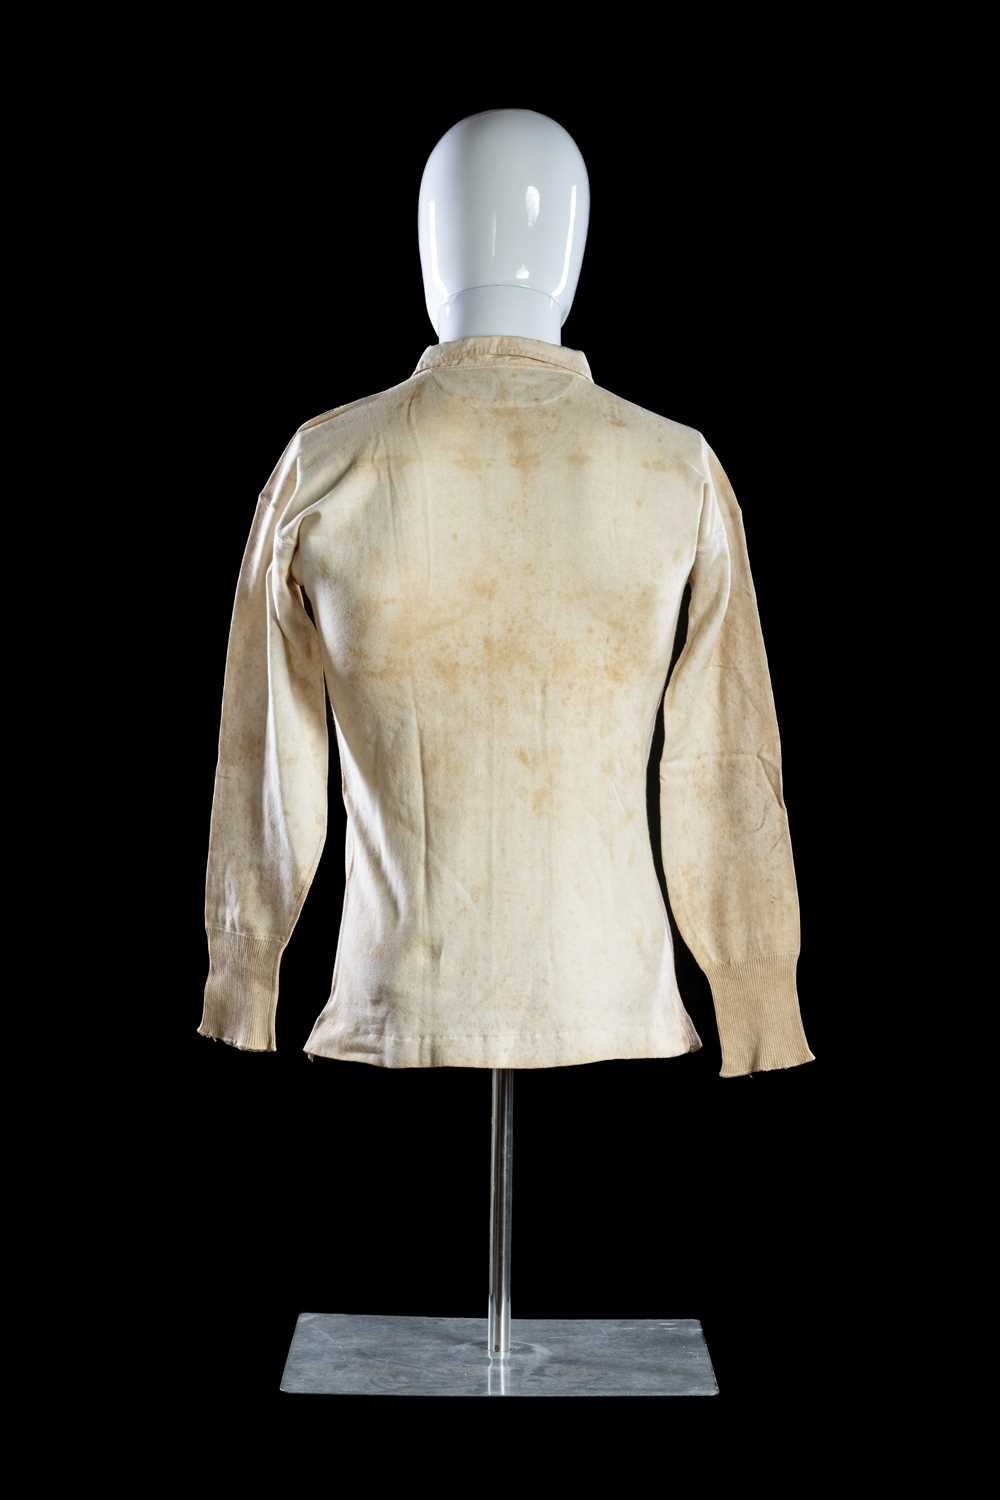 A 1912 ULSTER RUGBY UNION JERSEY MATCH-WORN VERSUS LEINSTER In all white and bearing silk square - Image 2 of 4